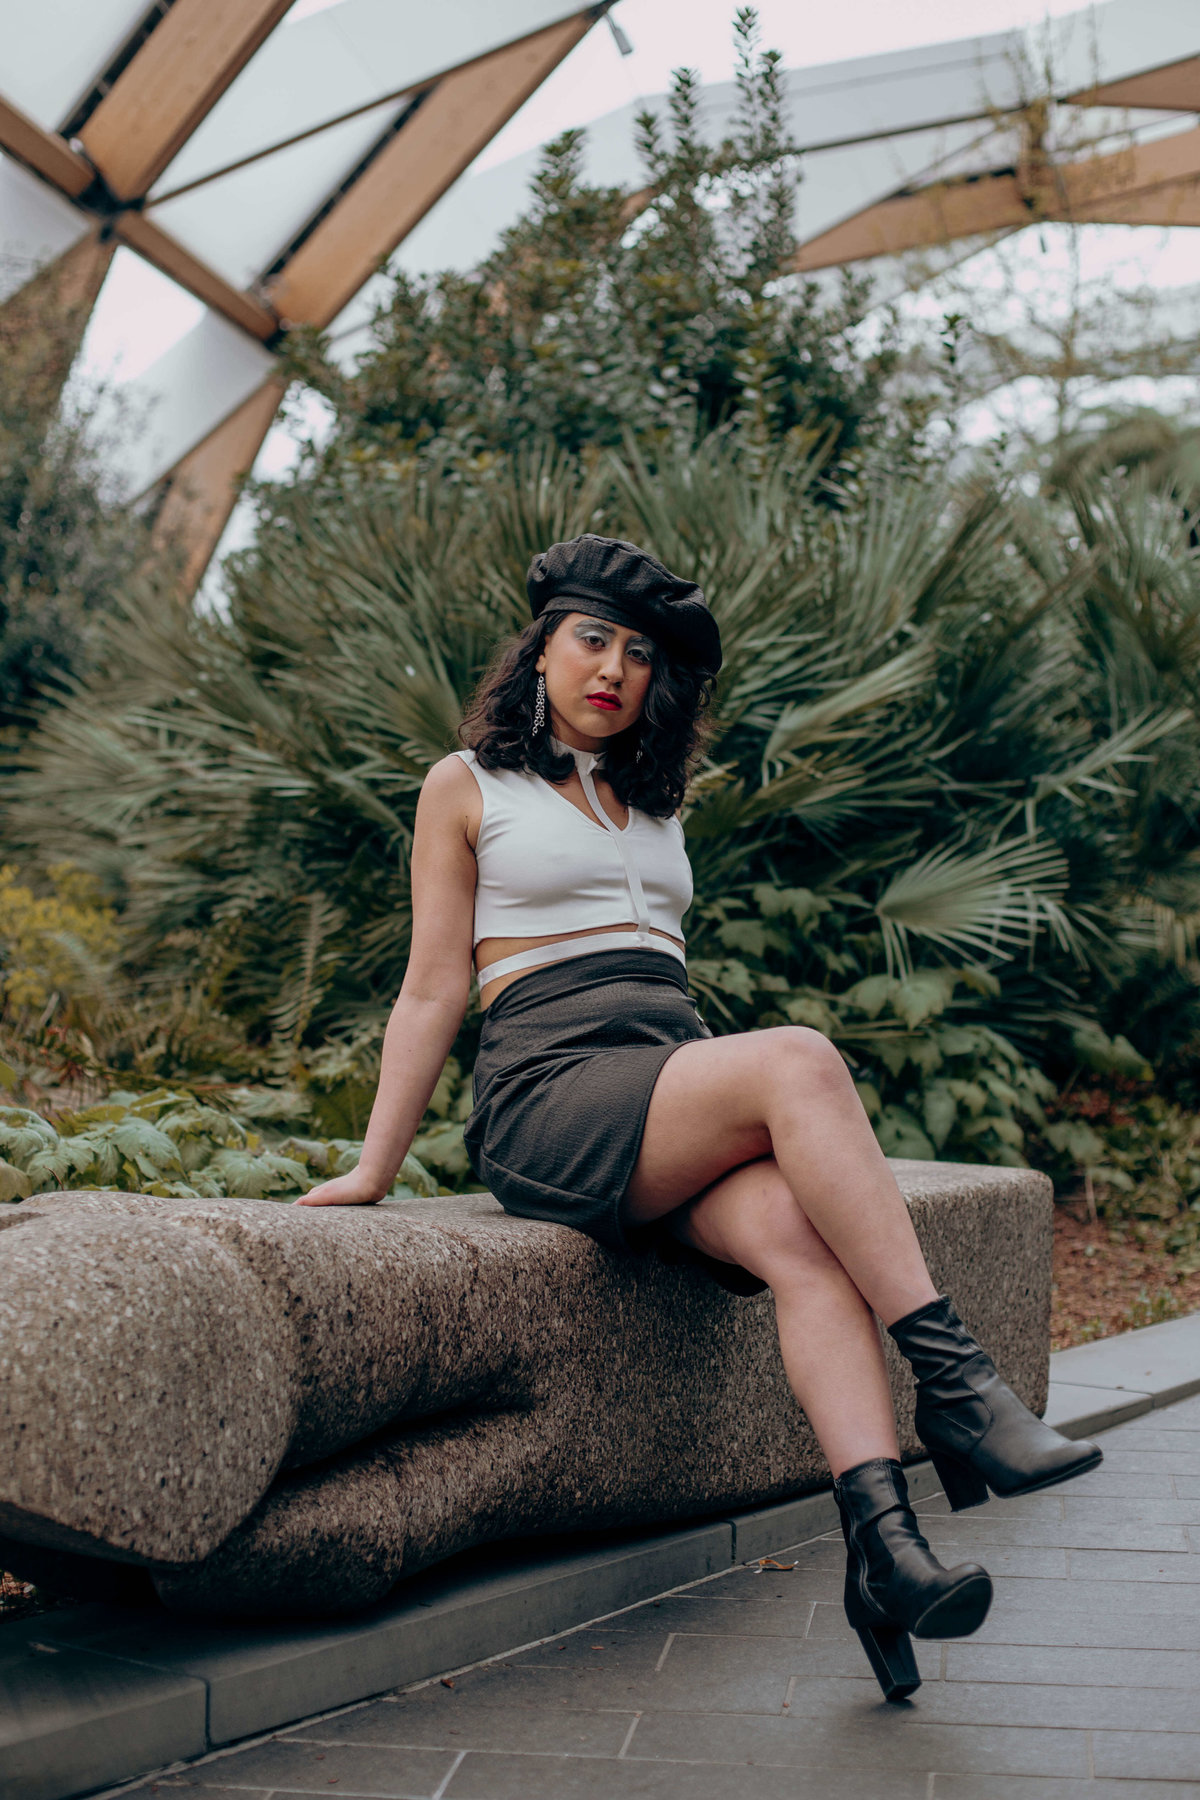 Cherie wearing a black and white leather outfit with red lipstick, sat on a stone bench infront of a green bush.